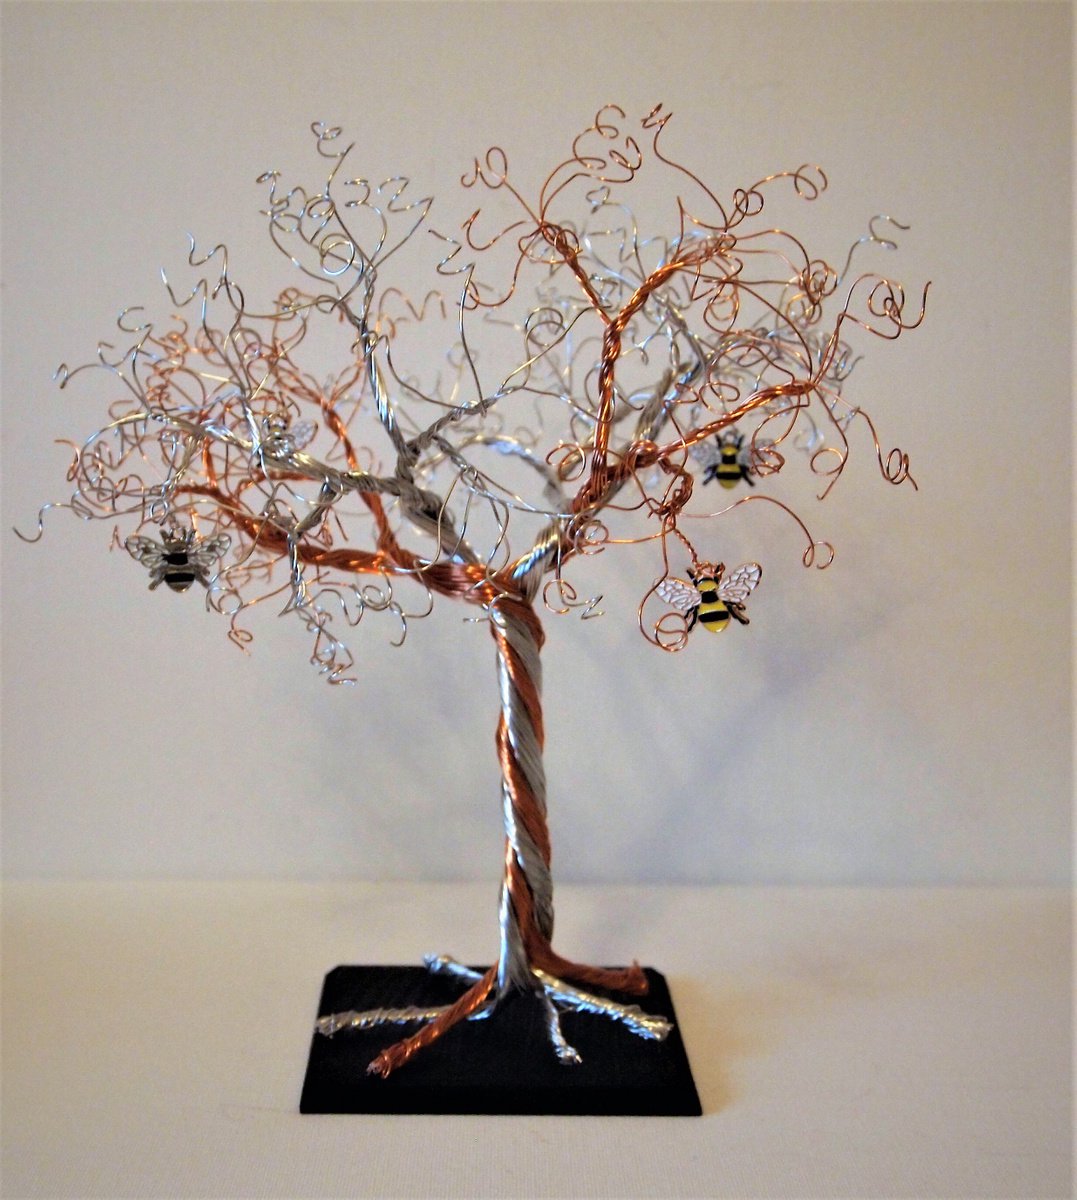 Silver & Copper wire tree sculpture with Enamelled Bumblebees by Steph Morgan